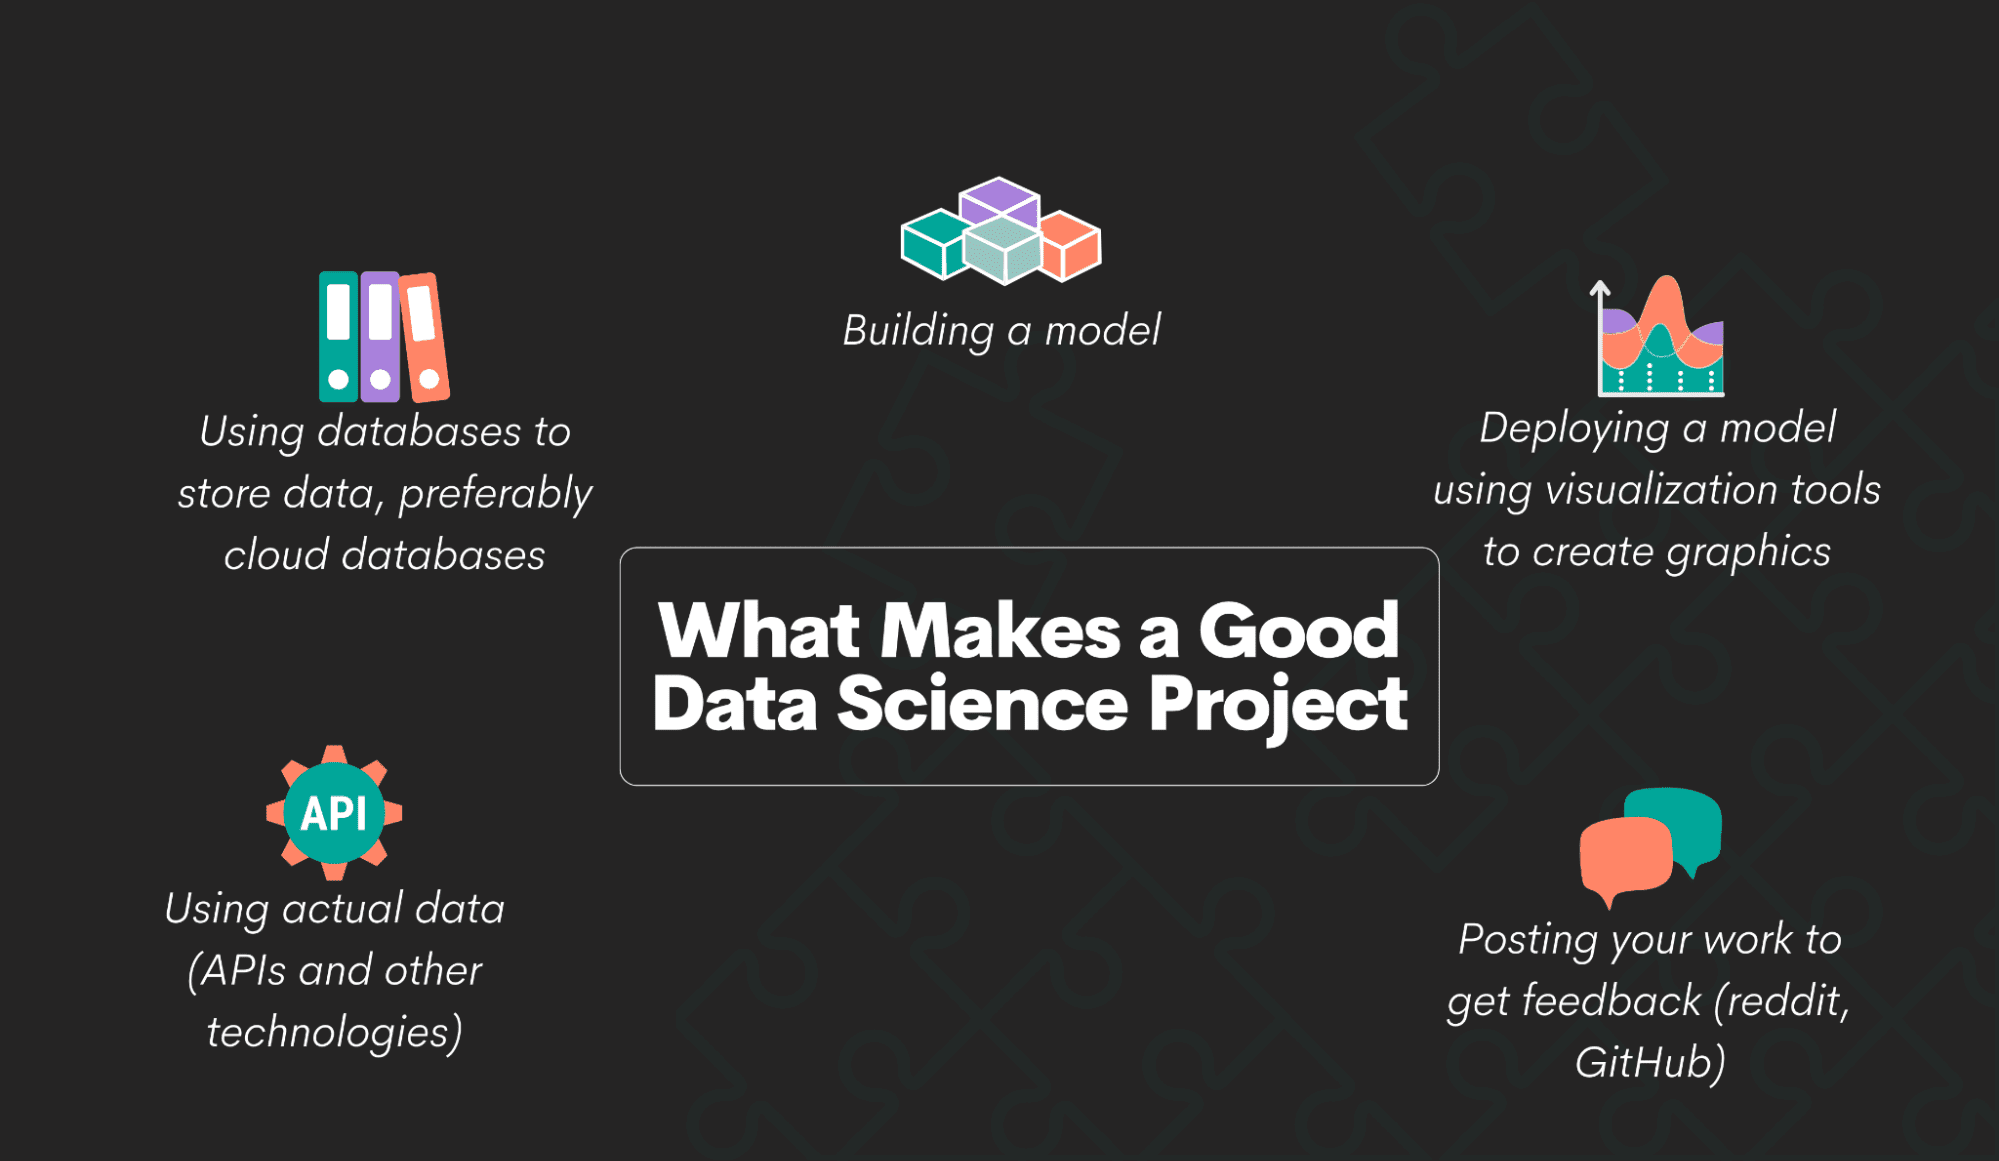 How to Prepare for a Data Science Interview